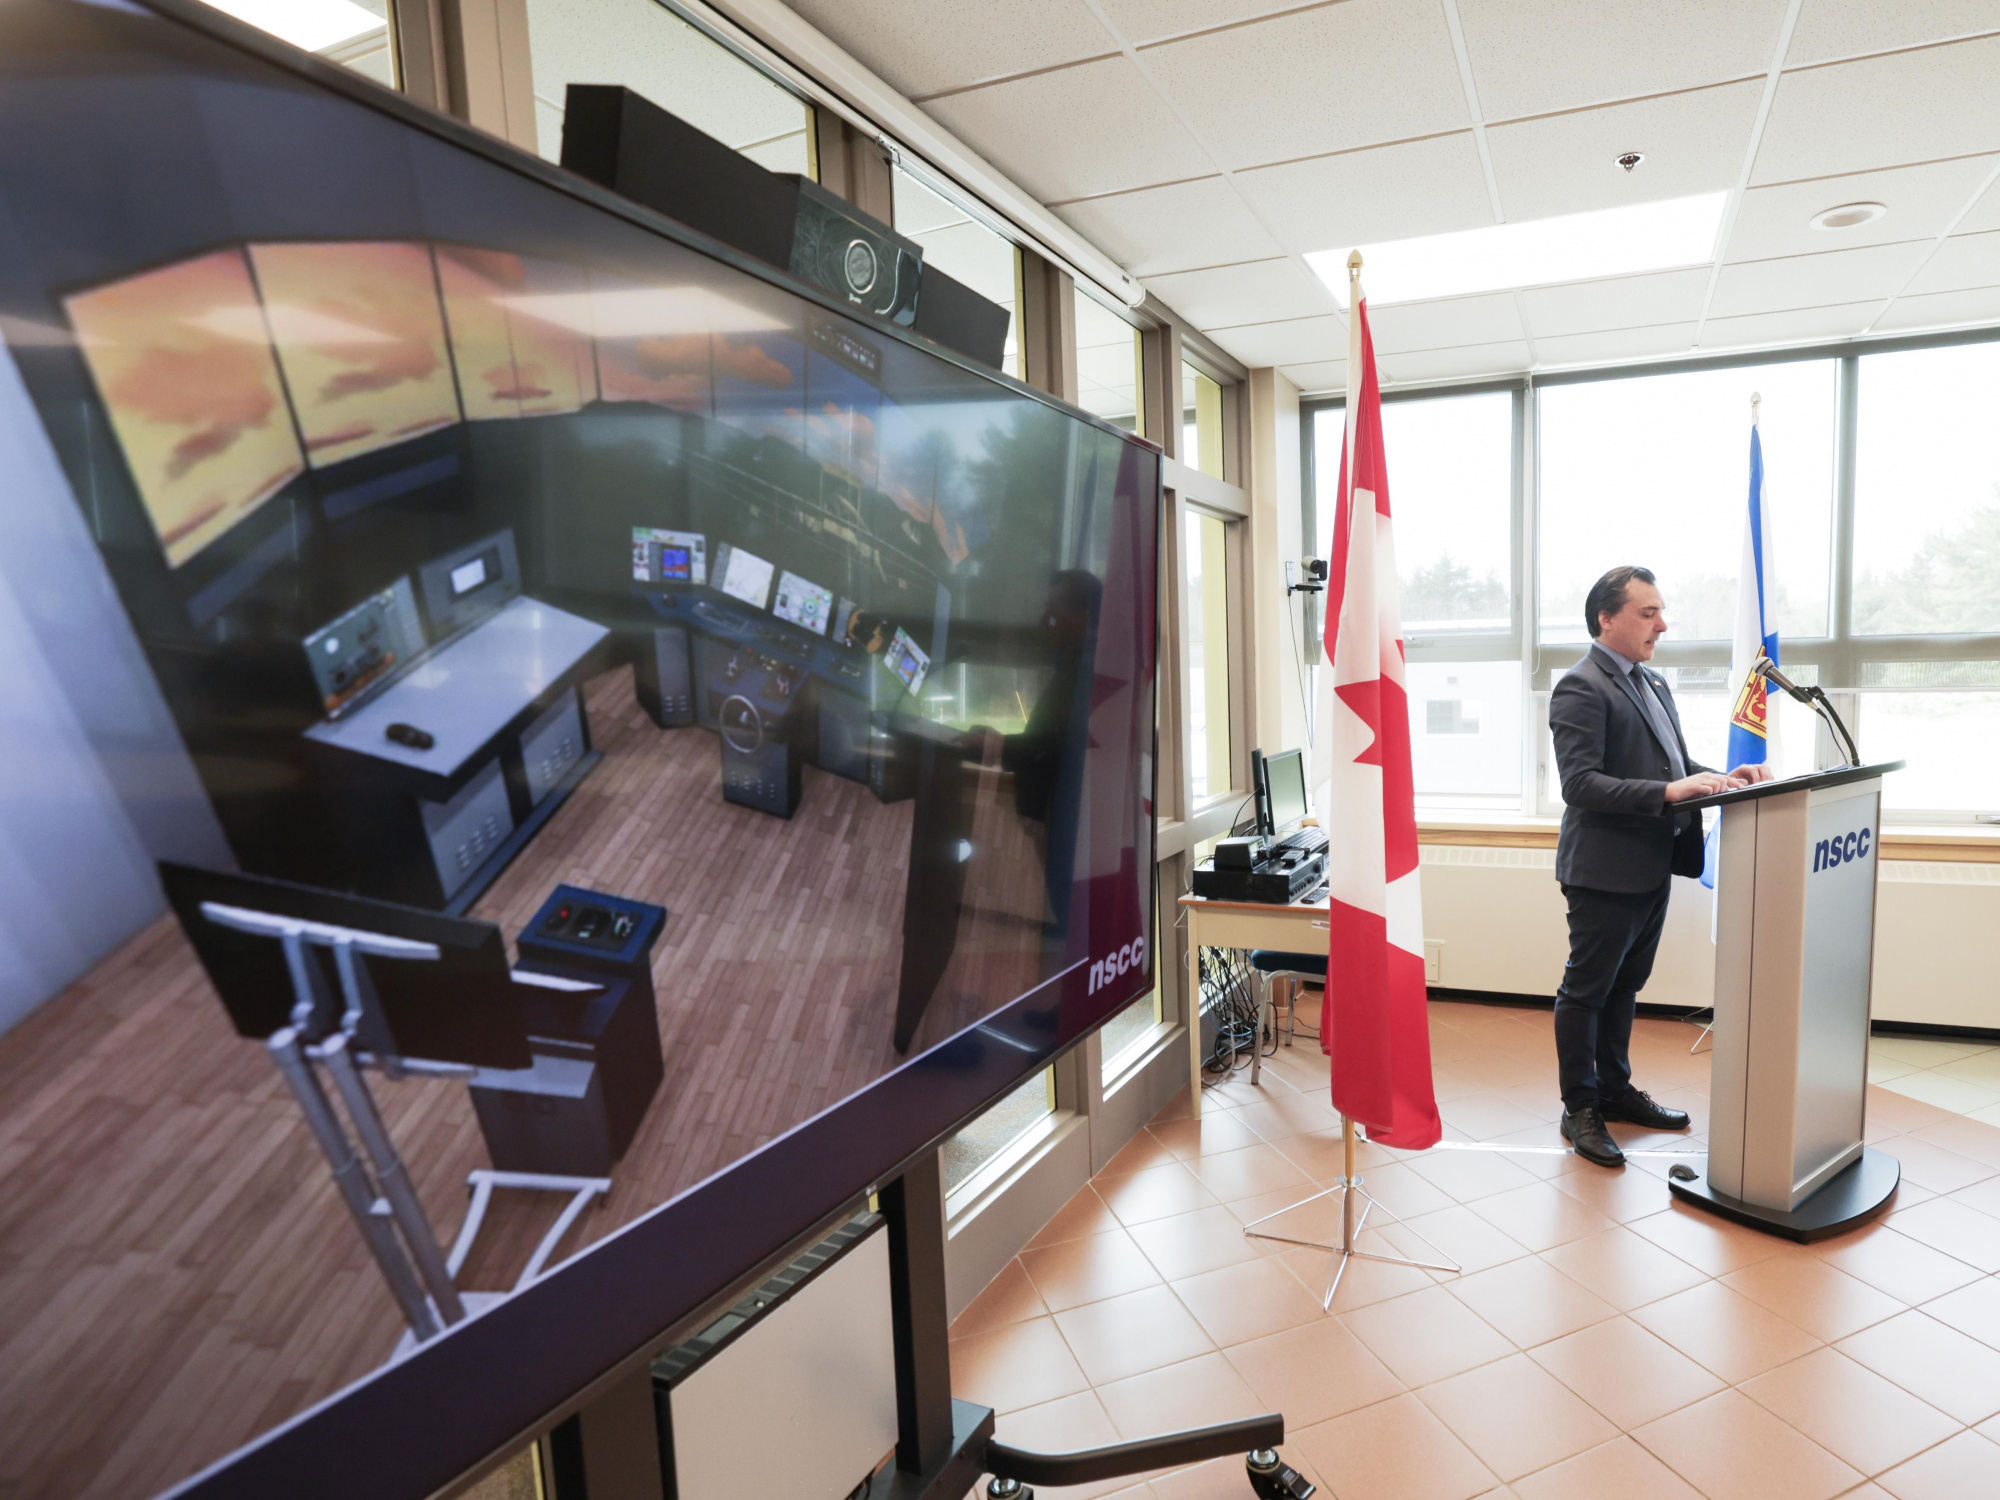 Photo of fisheries simulator on a screen and Shelburne MLA Nolan Young at a podium in the background